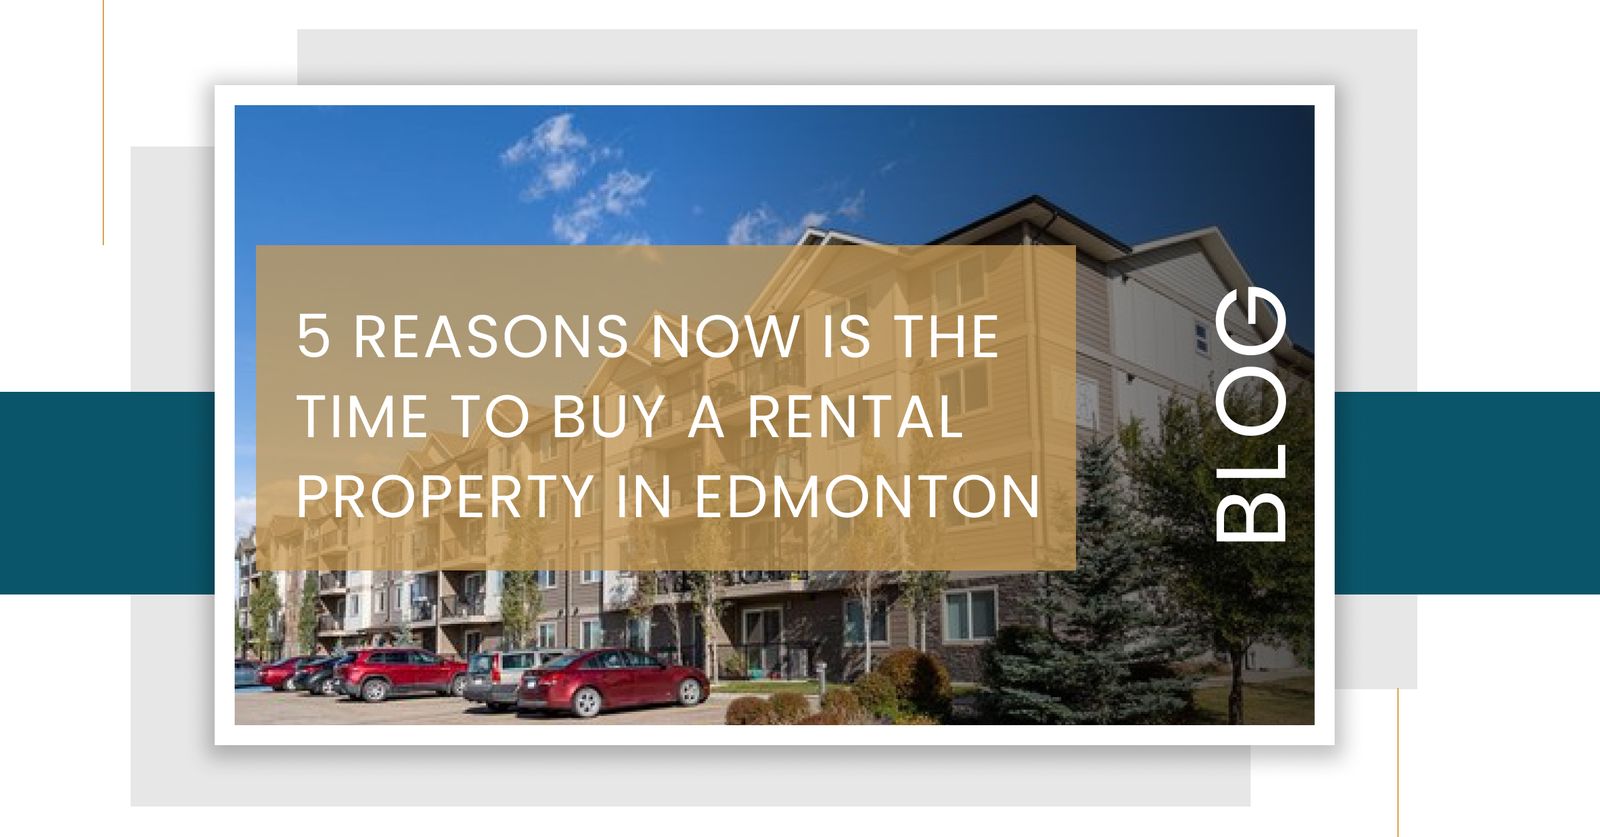 5 Reasons Now Is The Time To Buy A Rental Property In Edmonton